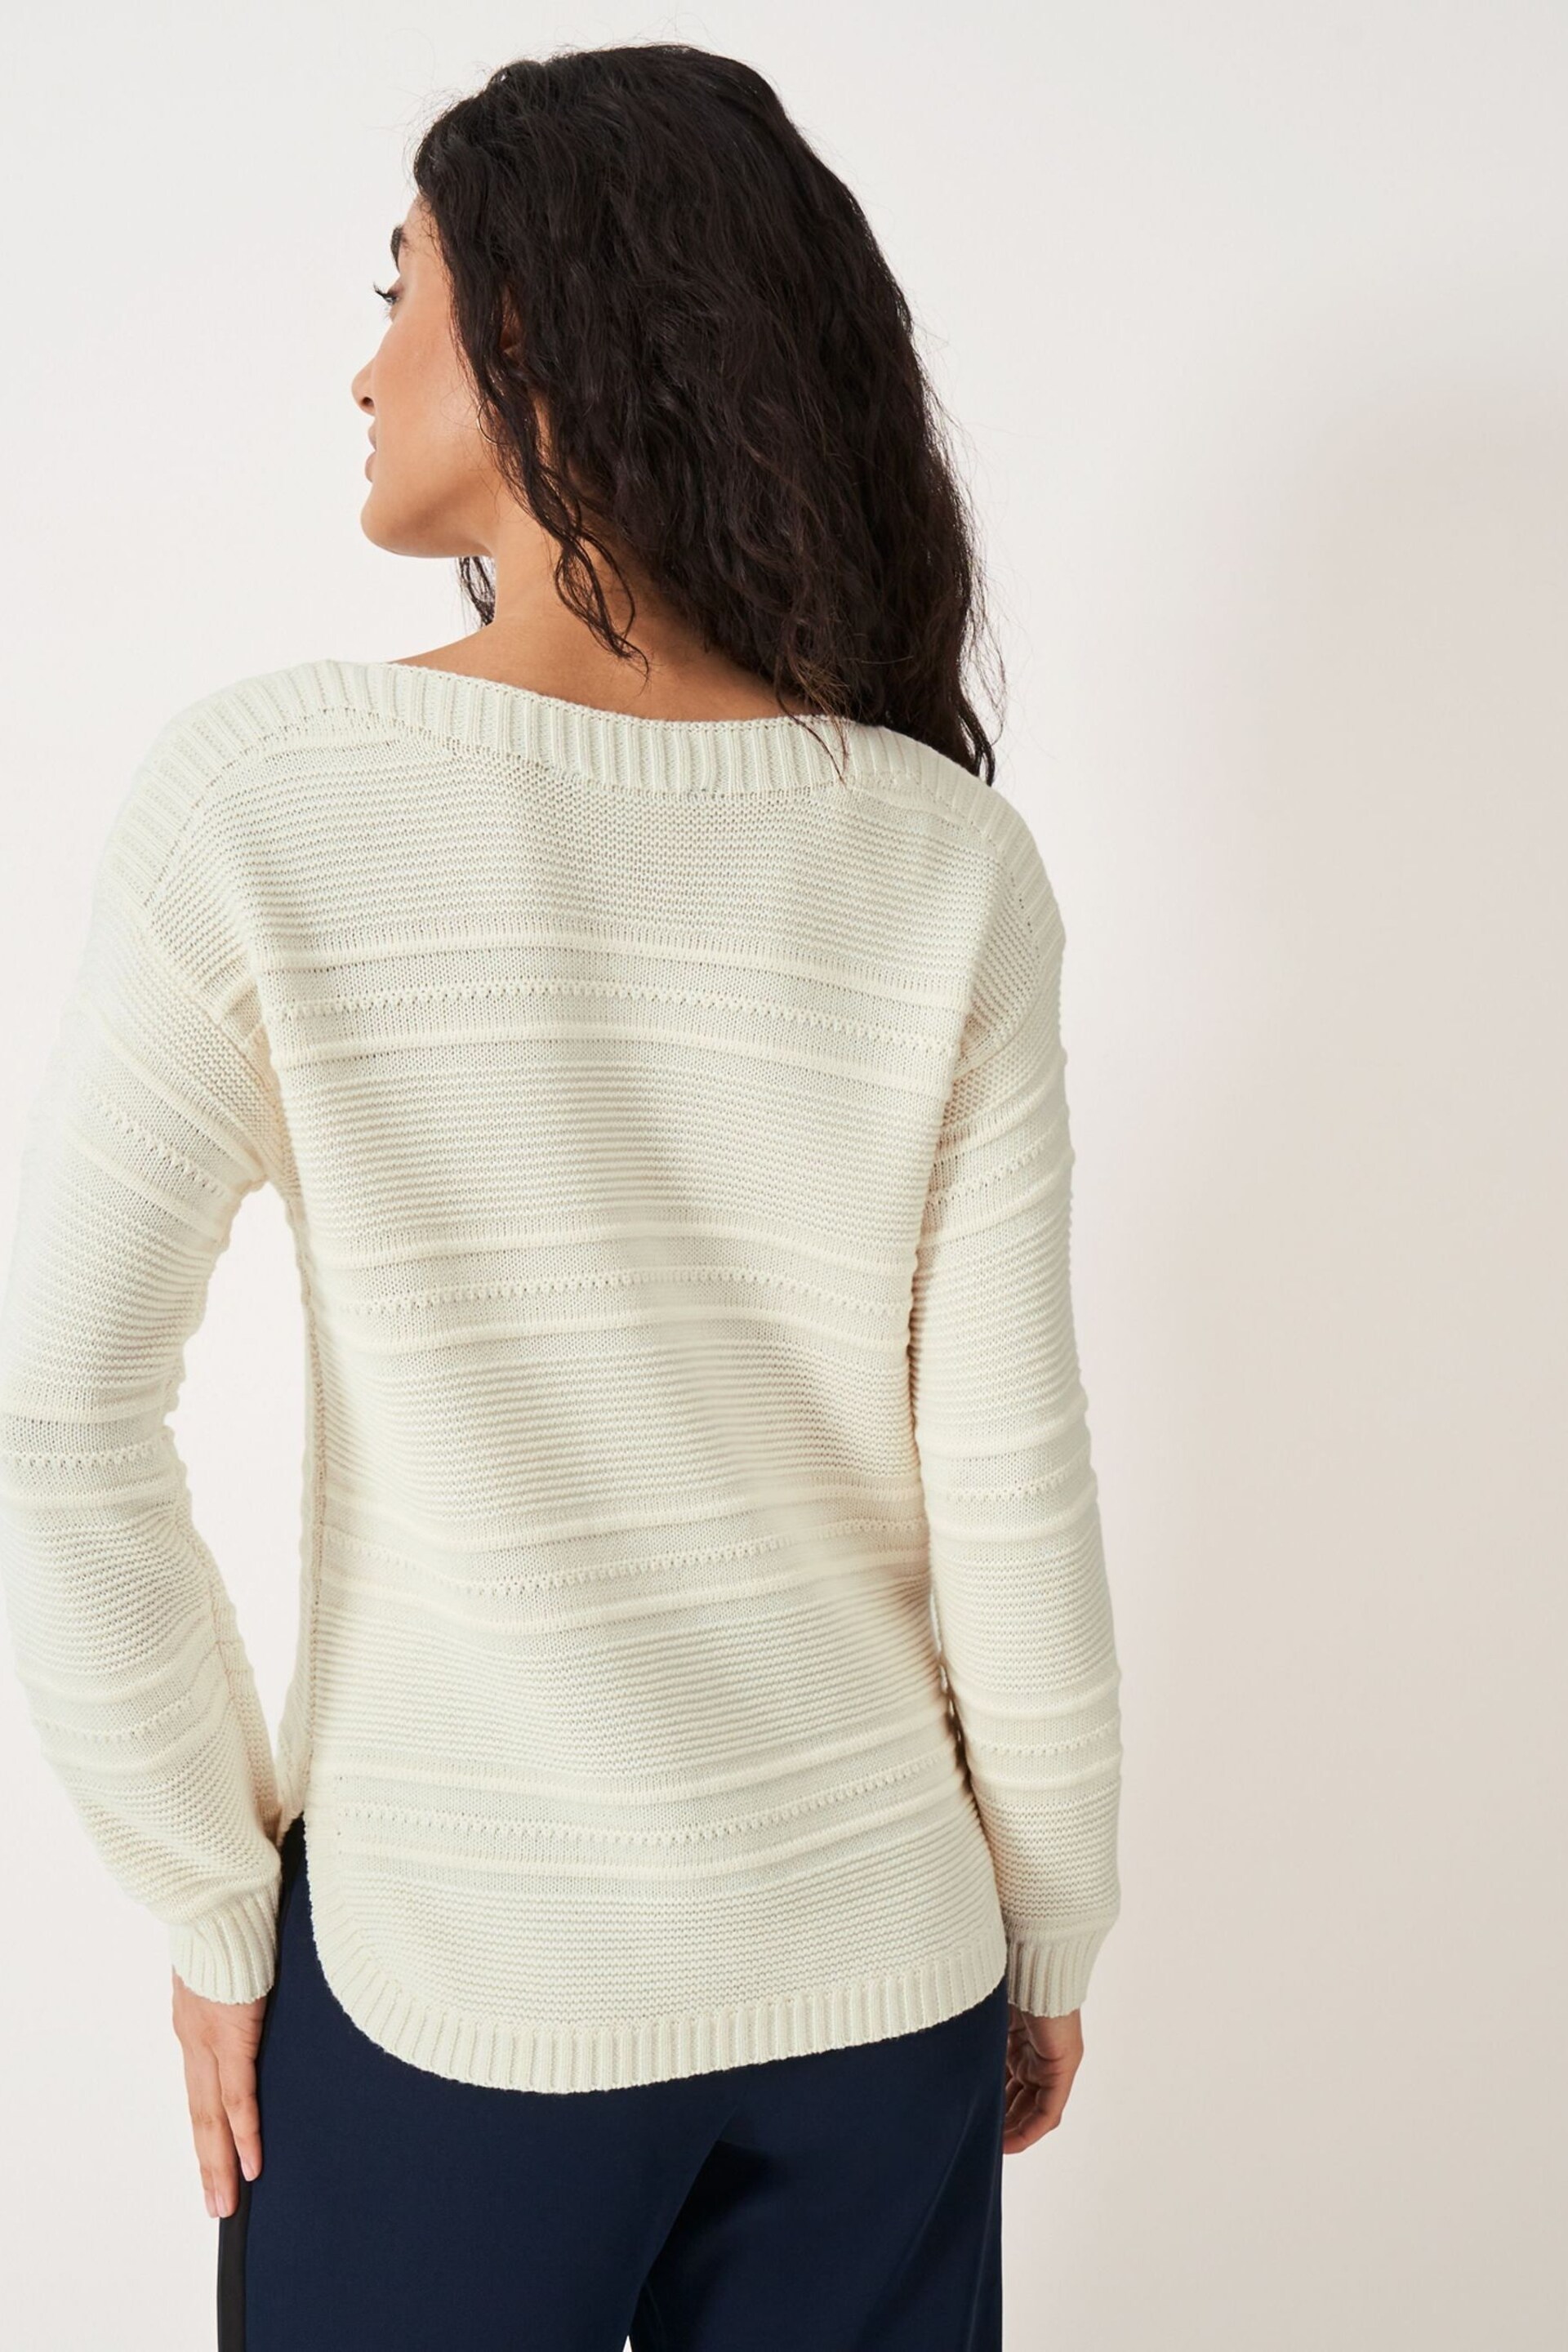 Crew Clothing Tali Knit Jumper - Image 2 of 5